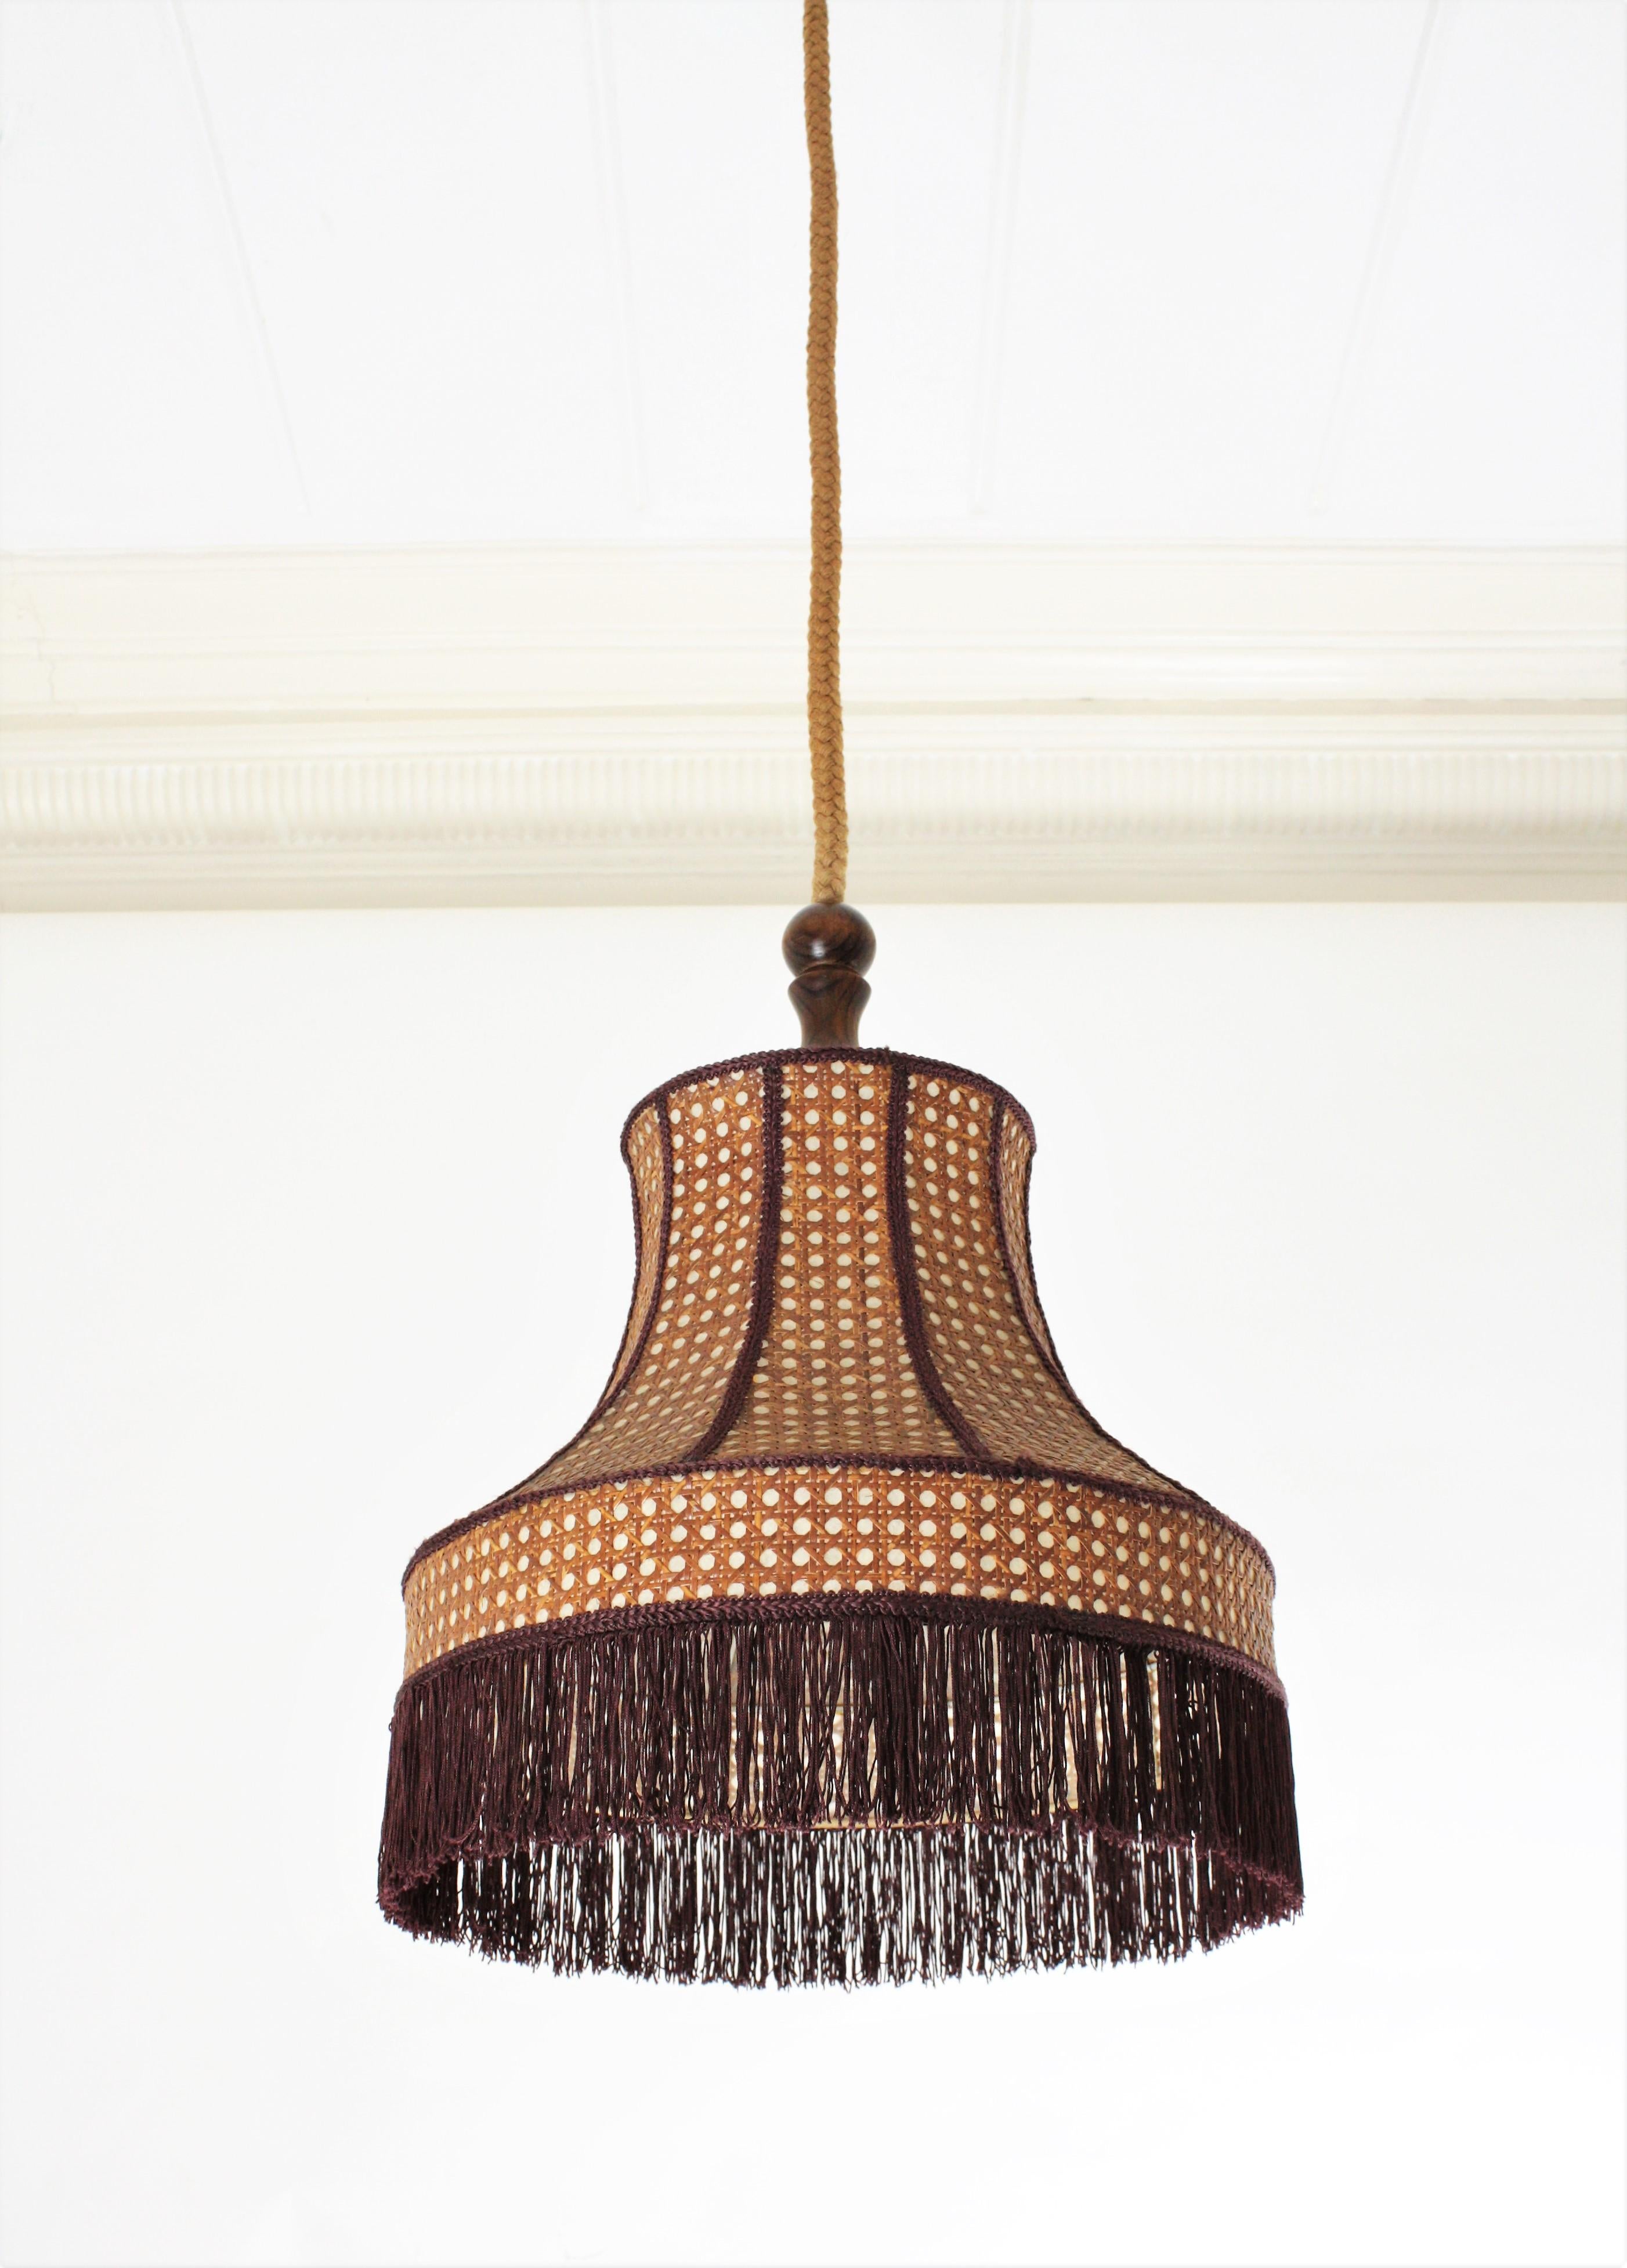 Rattan Wicker Pendant Hanging Lamp with Pagoda Shape and Fringed Bottom 3